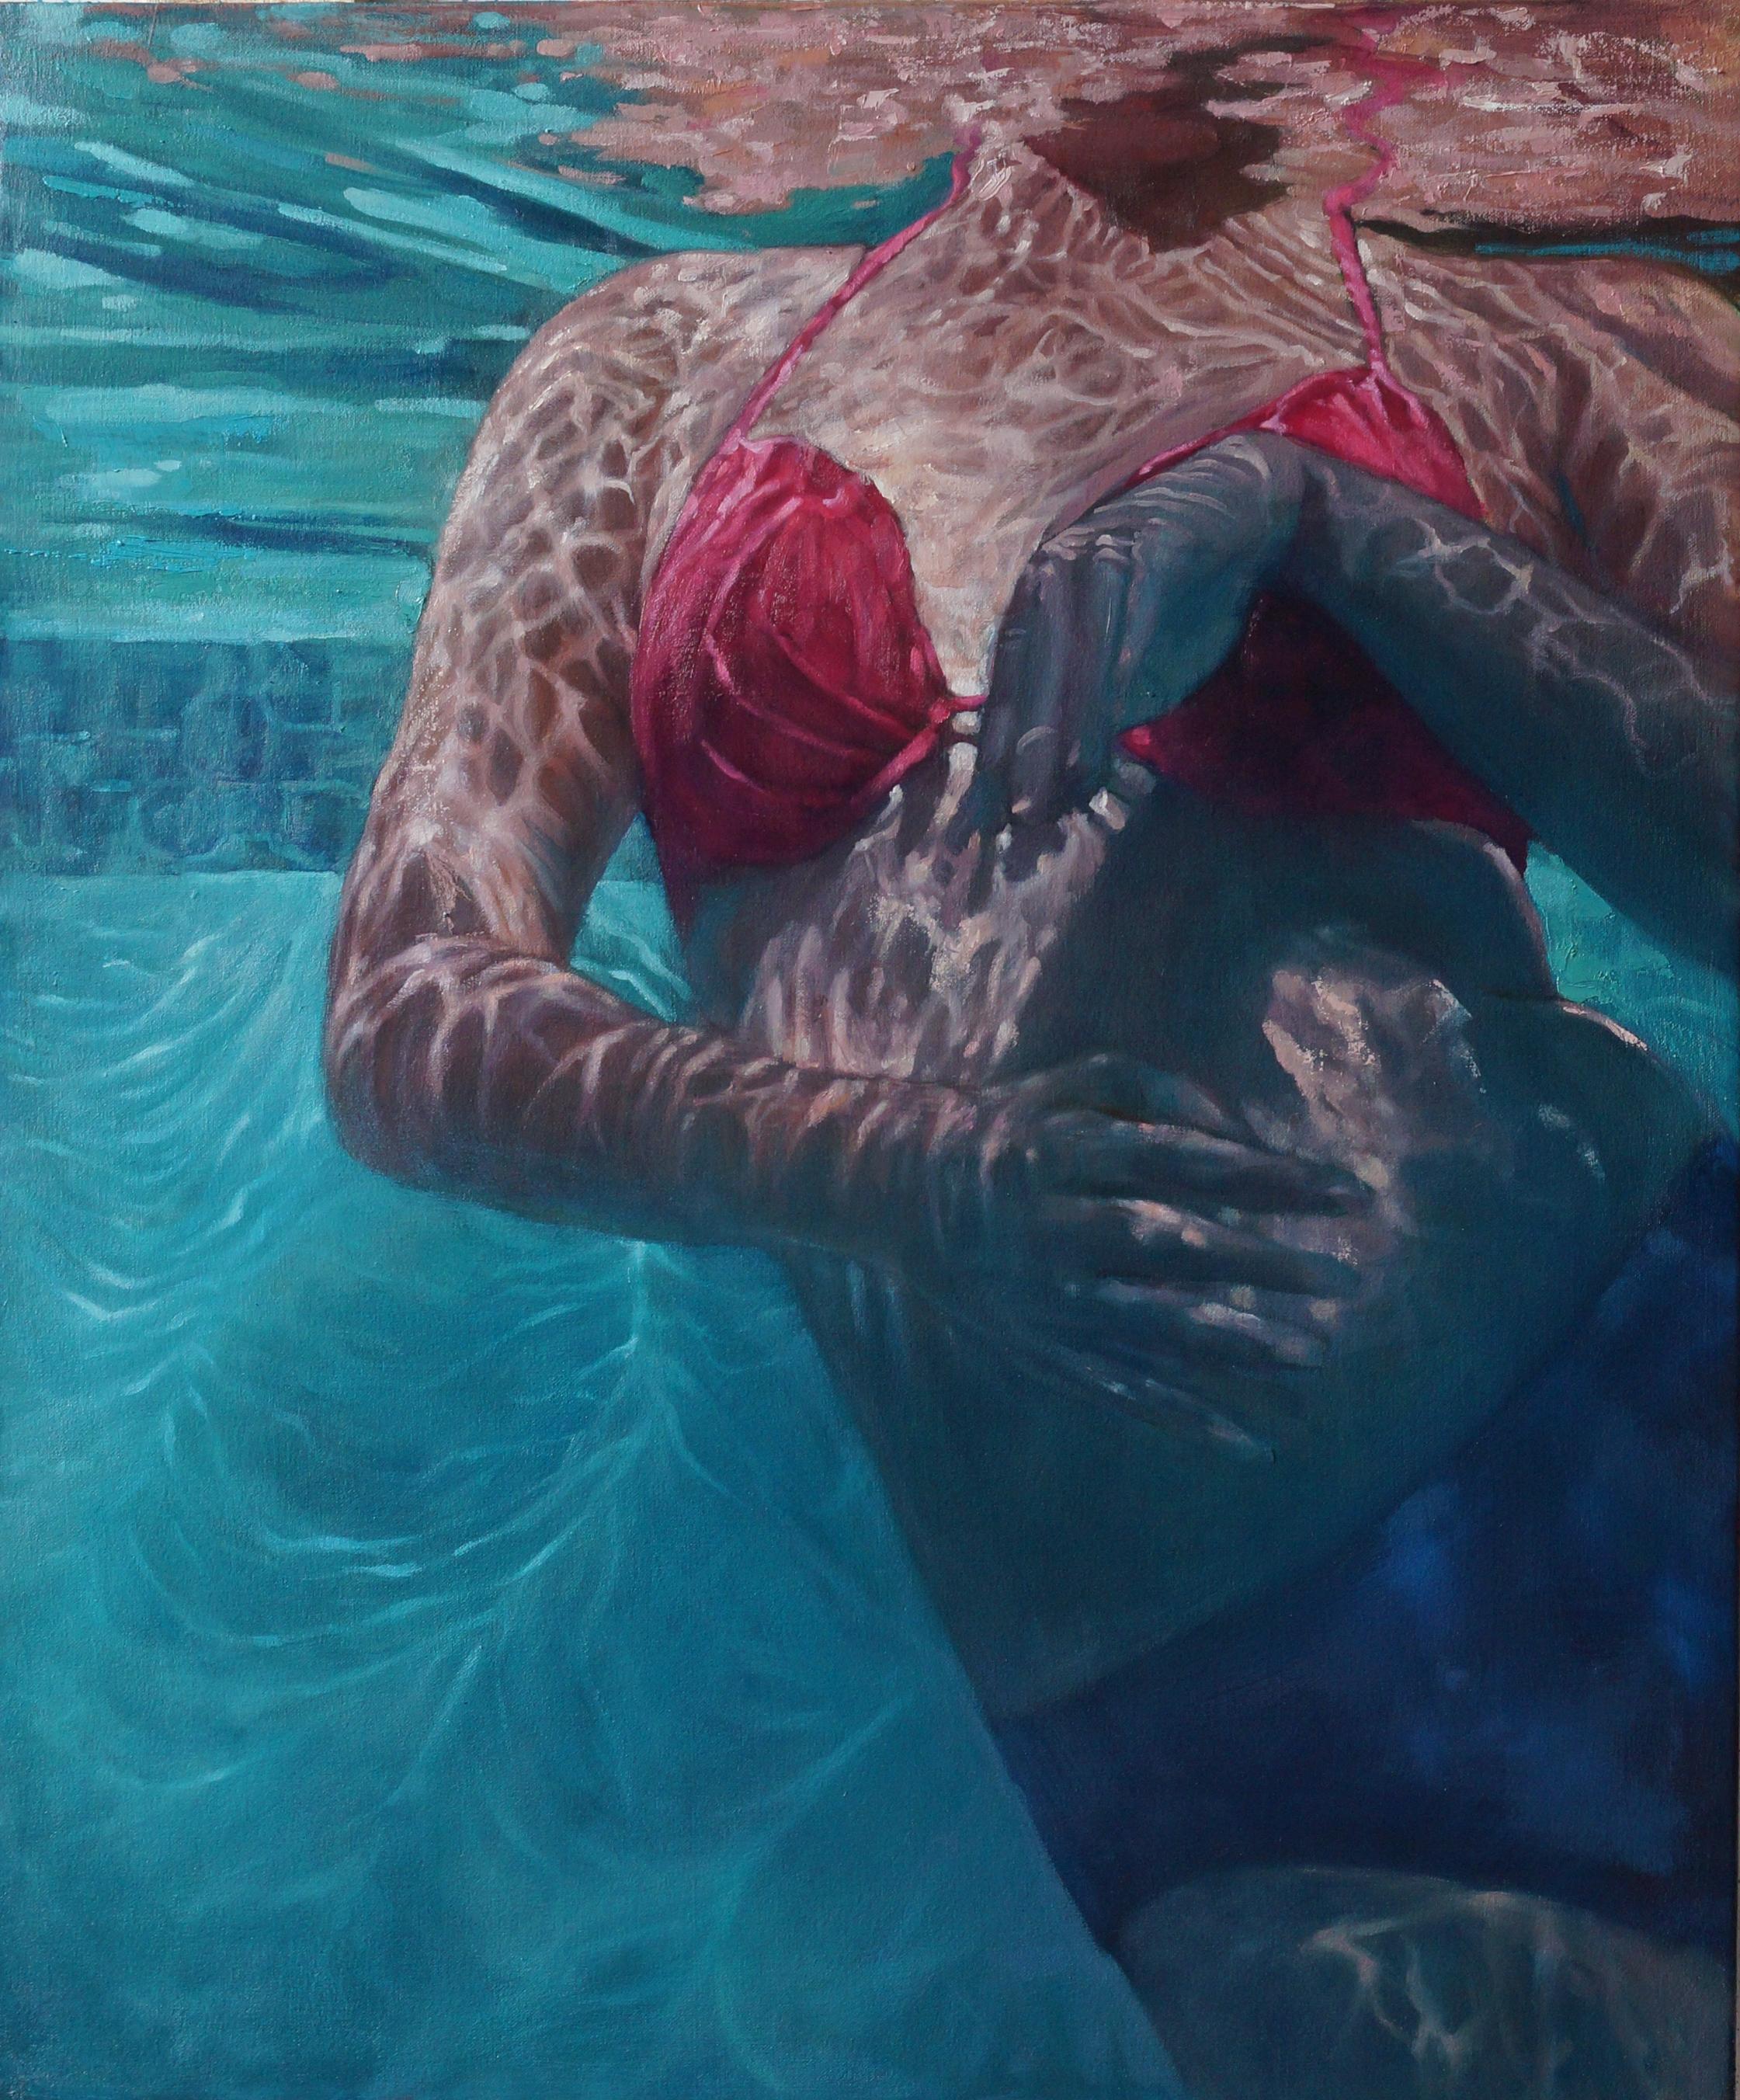 Carol O'Malia Figurative Painting - "Coming Up For Air" oil painting of a figure underwater in red bikini